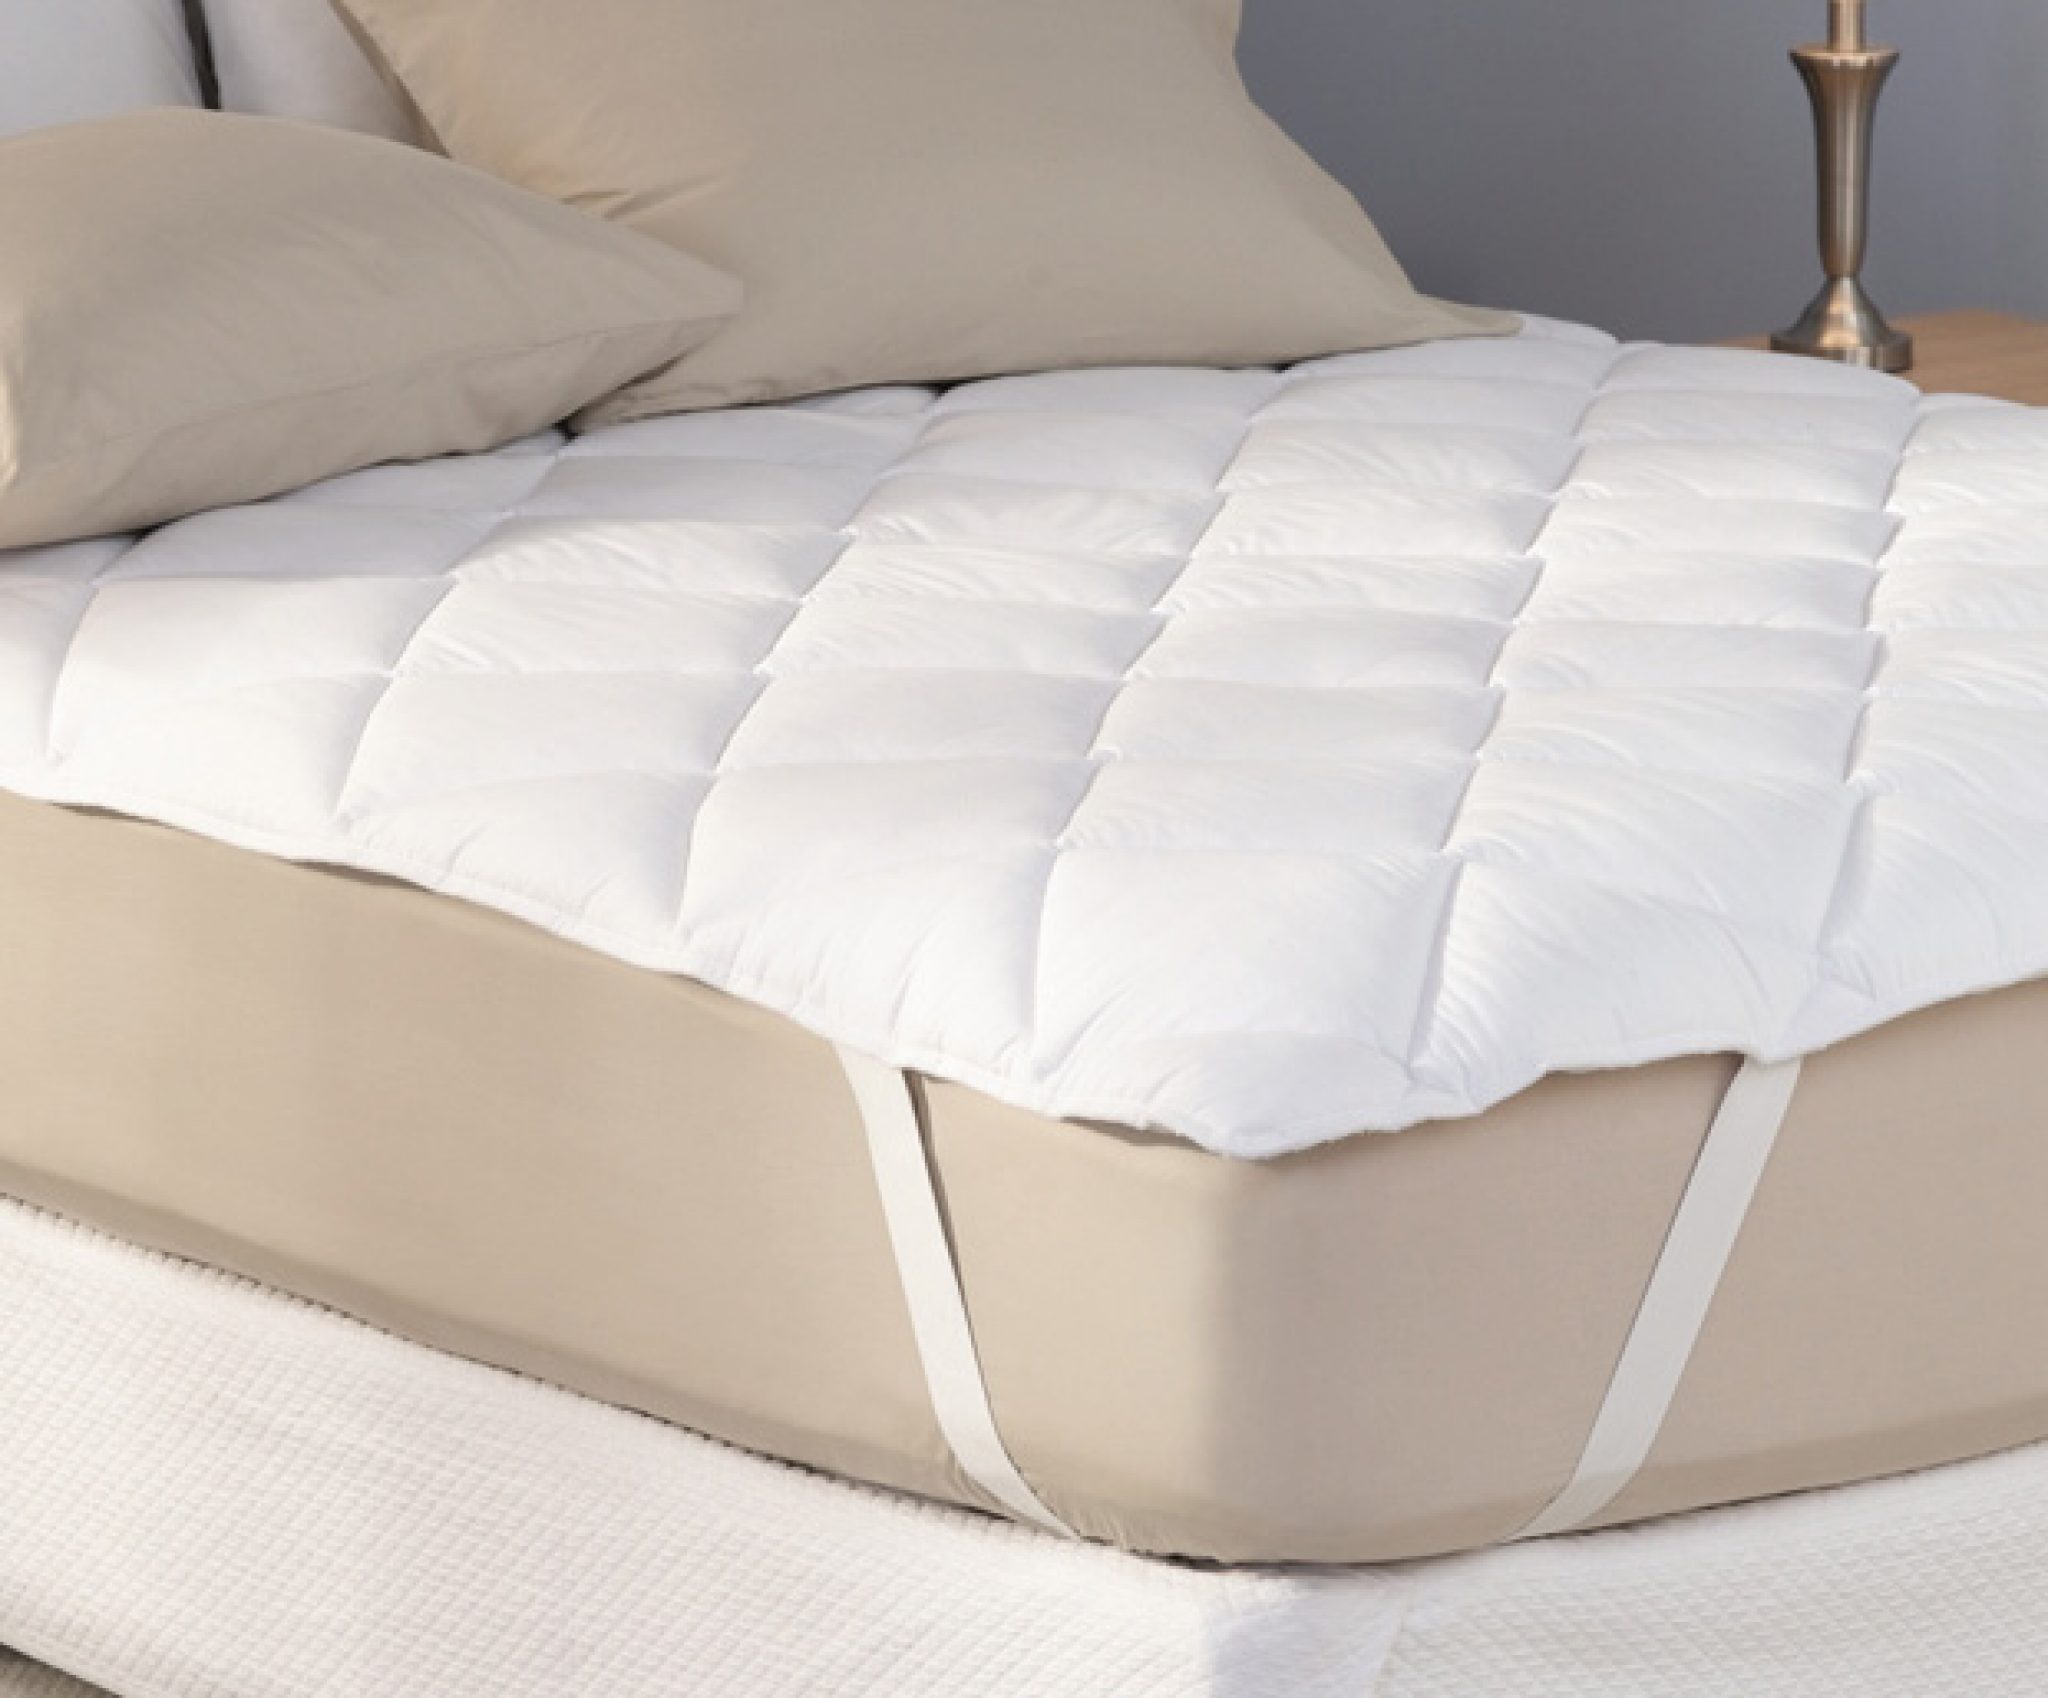 straps to keep mattress pad in place